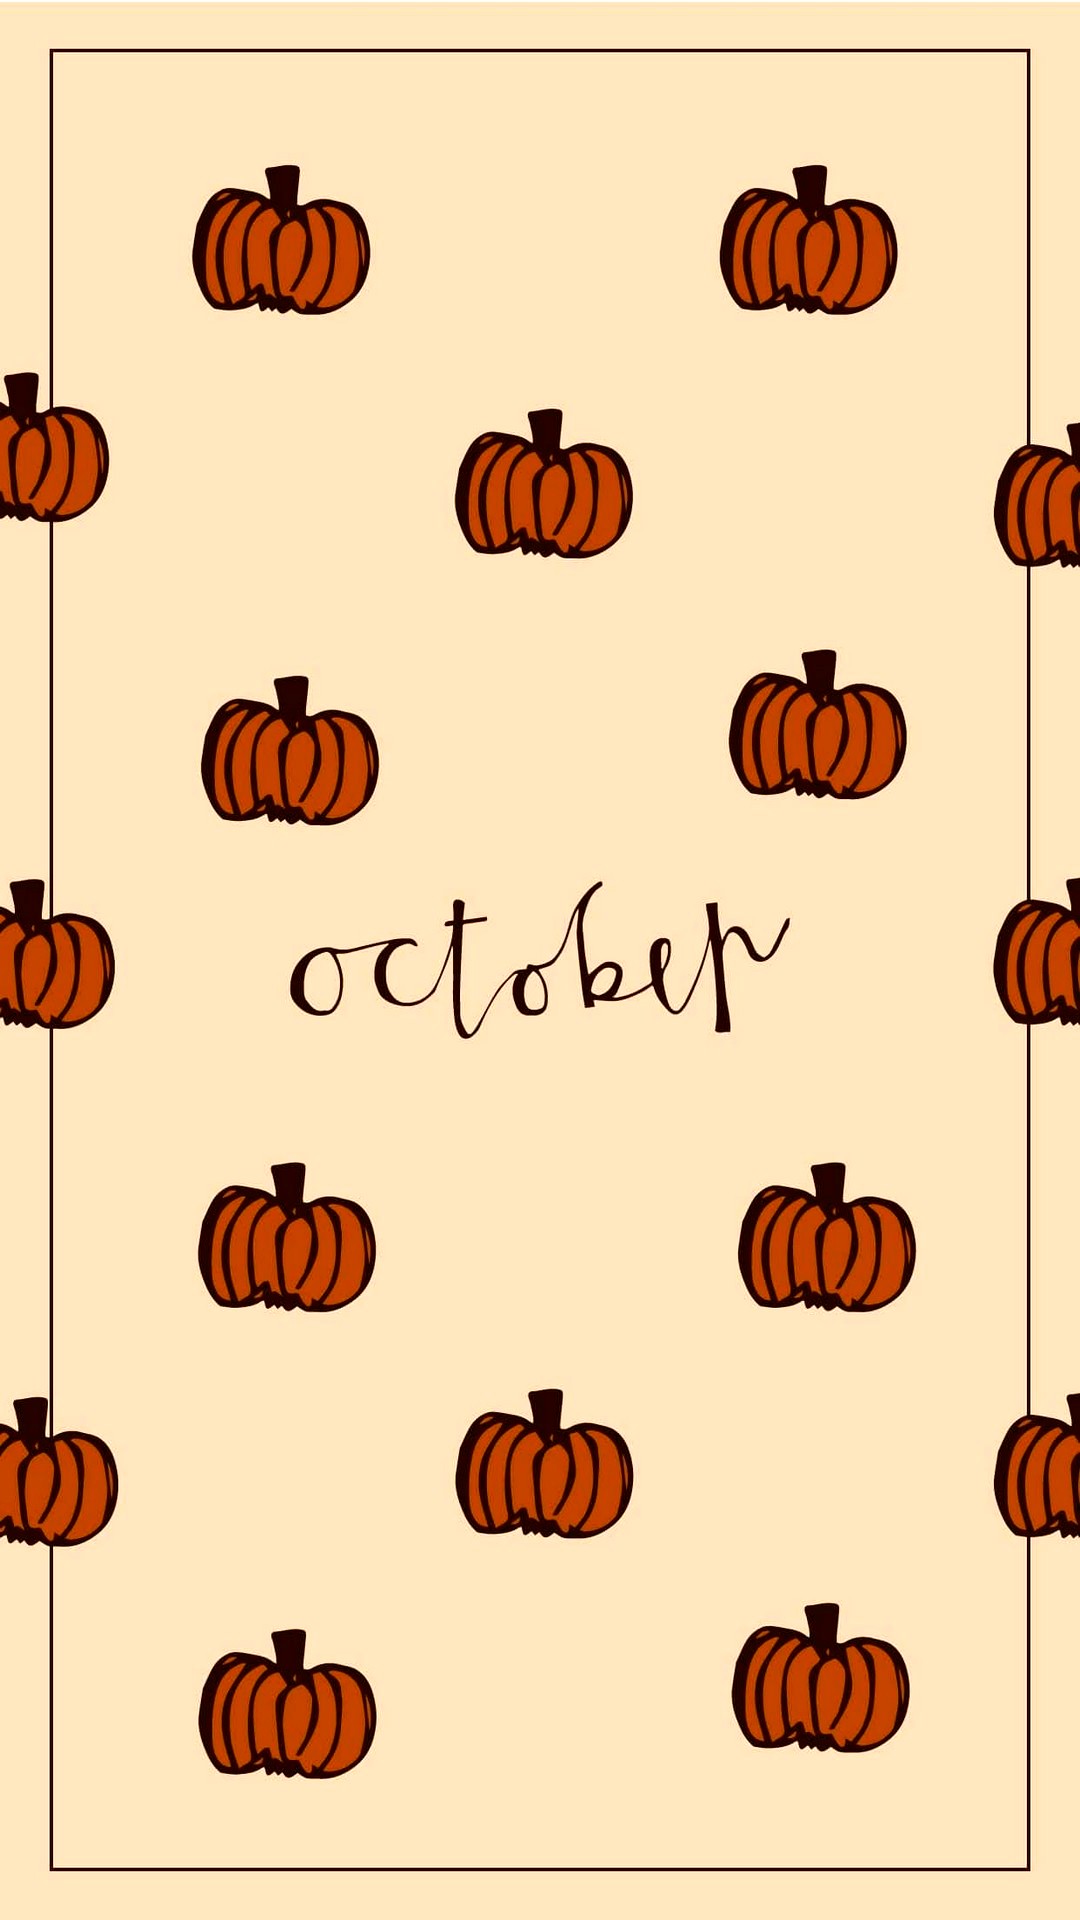 October Wallpaper For Phone HD with high-resolution 1080x1920 pixel. Download all Mobile Wallpapers and Use them as wallpapers for your iPhone, Tablet, iPad, Android and other mobile devices